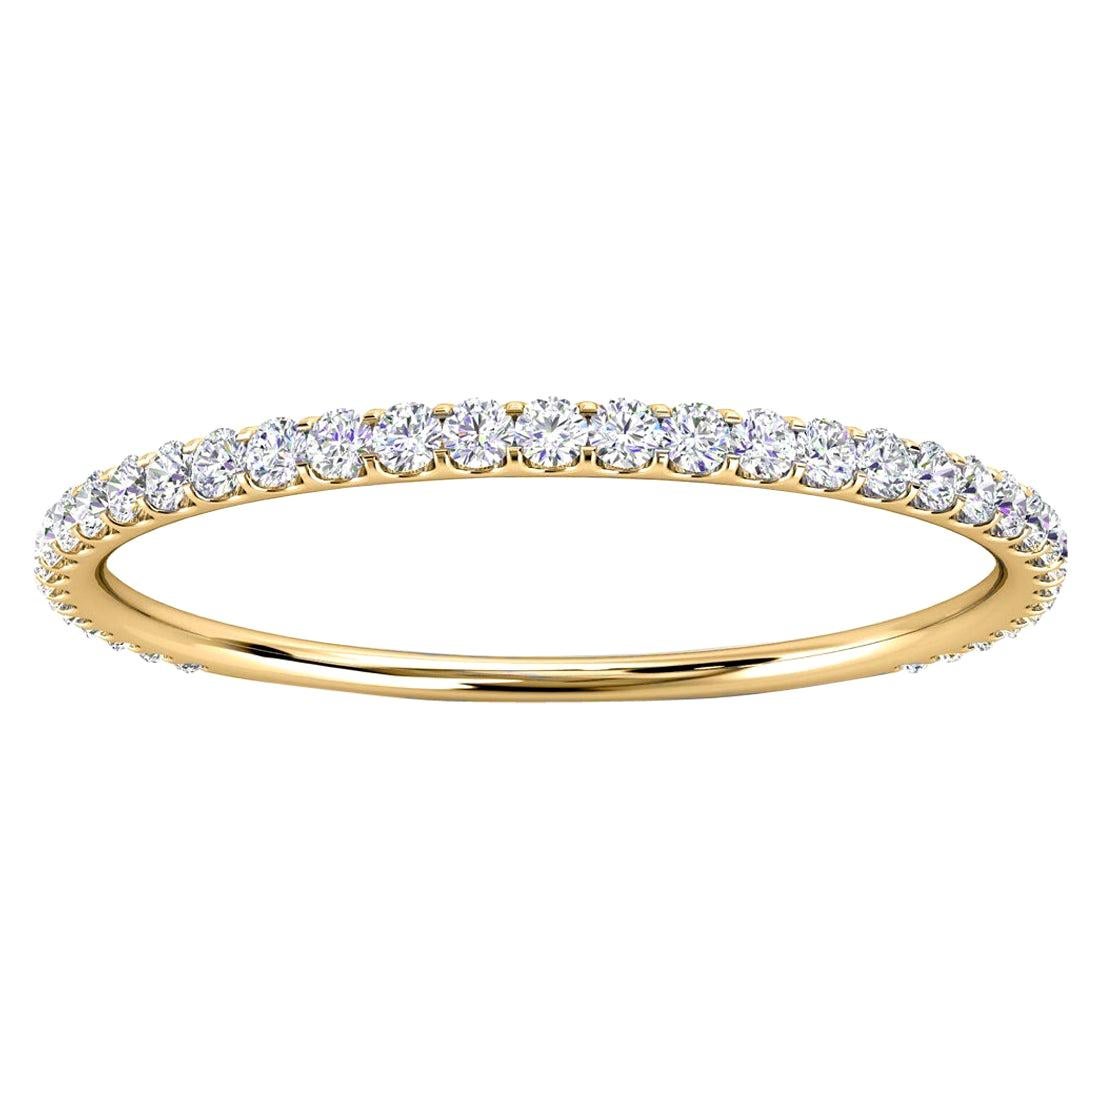 For Sale:  18K Yellow Gold Petite Carole Micro-Prong Diamond Ring '1/6 Ct. Tw'